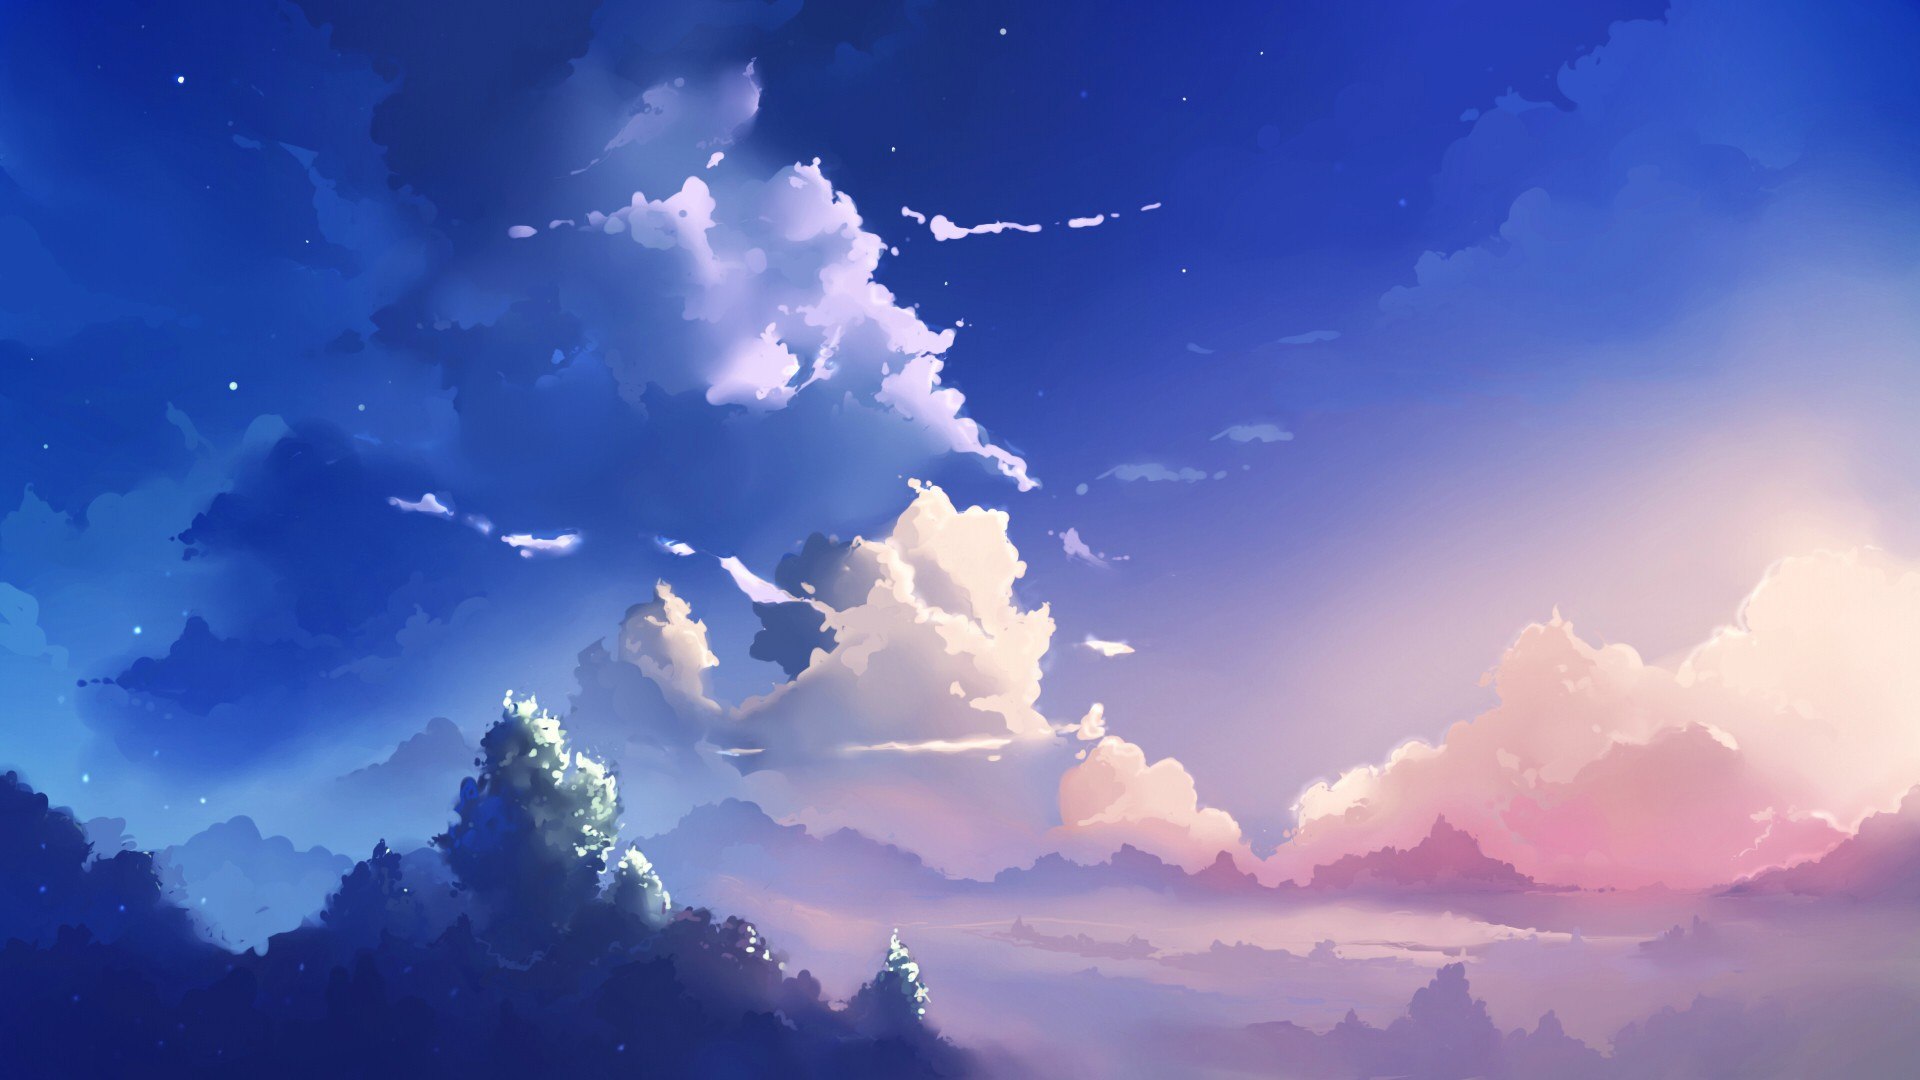 Anime scenery wallpaper 1920x1080 - (#34619) - High Quality and ...